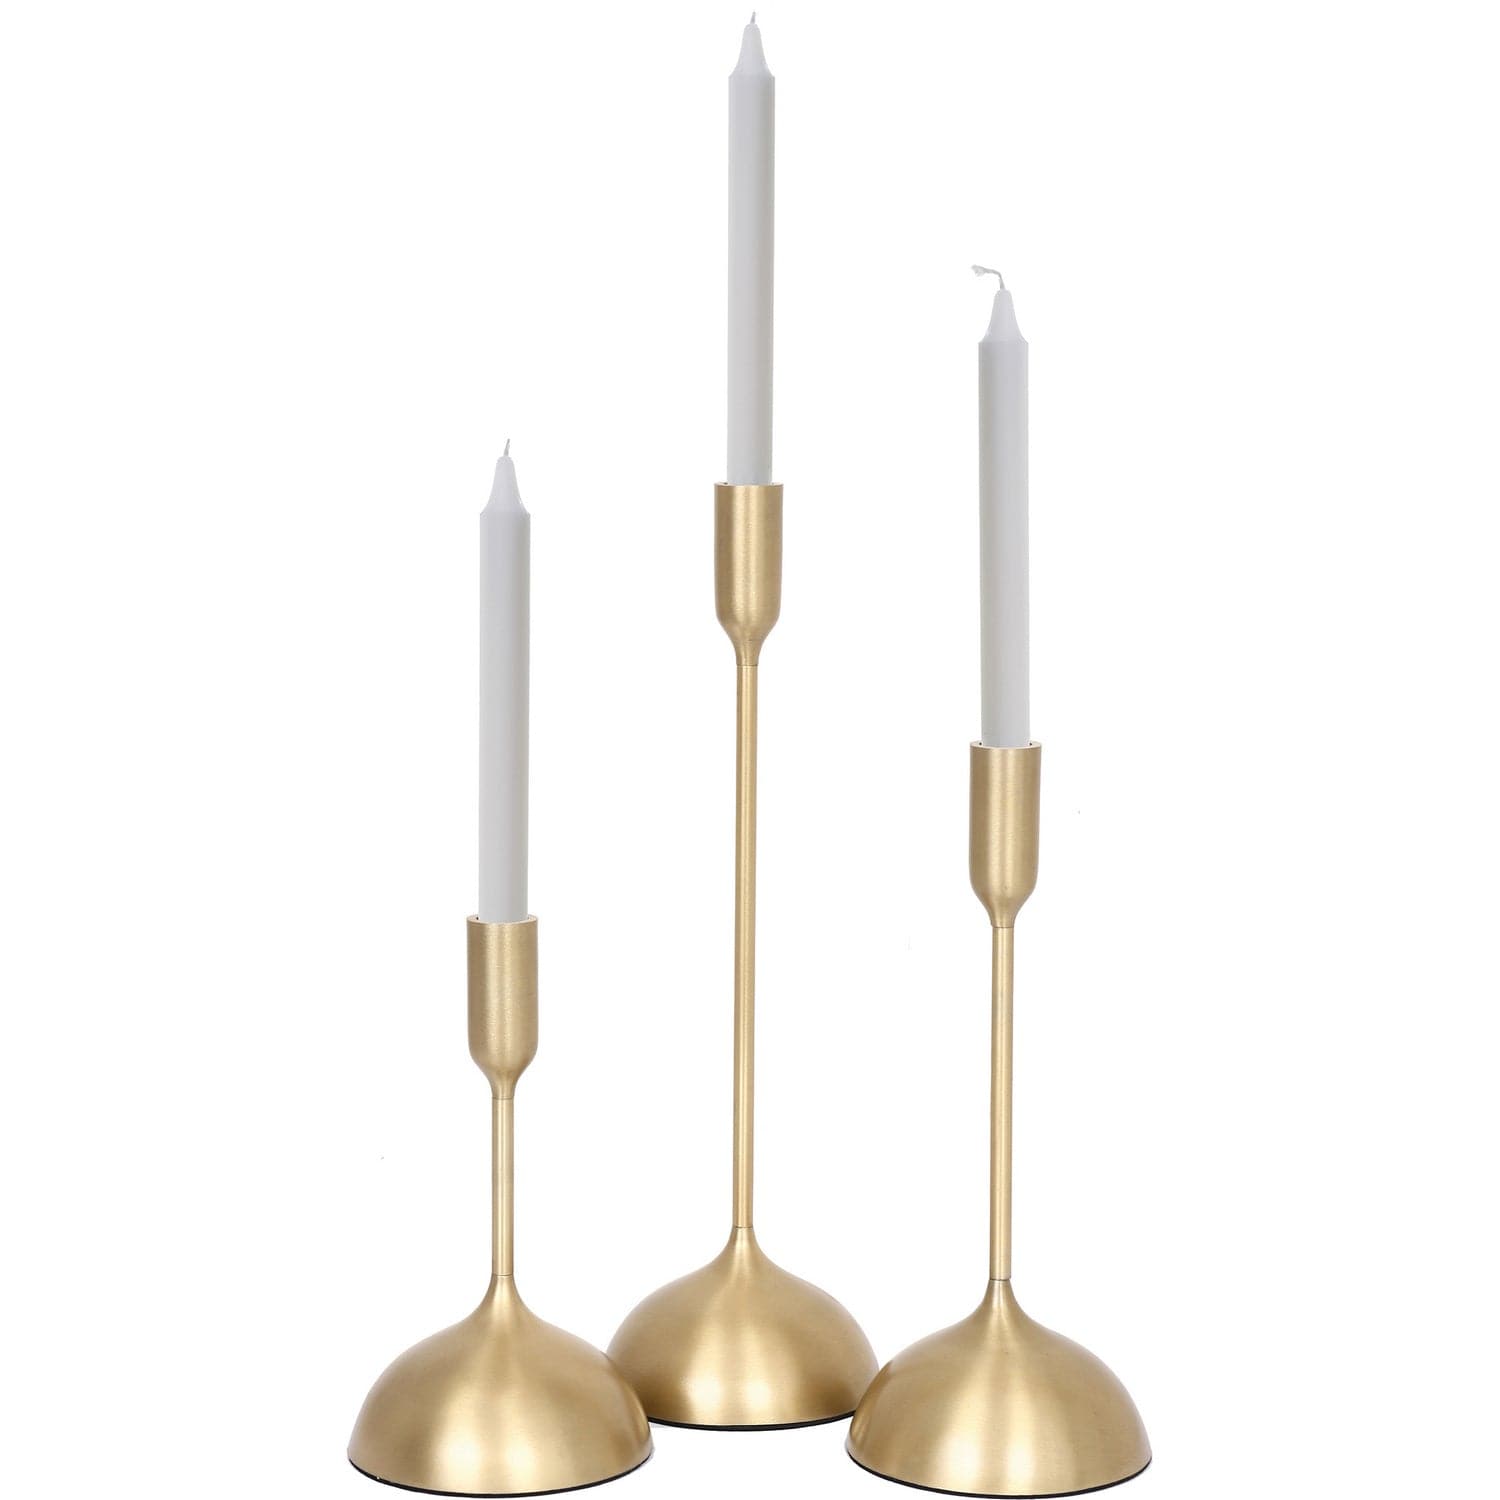 Renwil - CAN158 - Home Accents - Candles/Holders